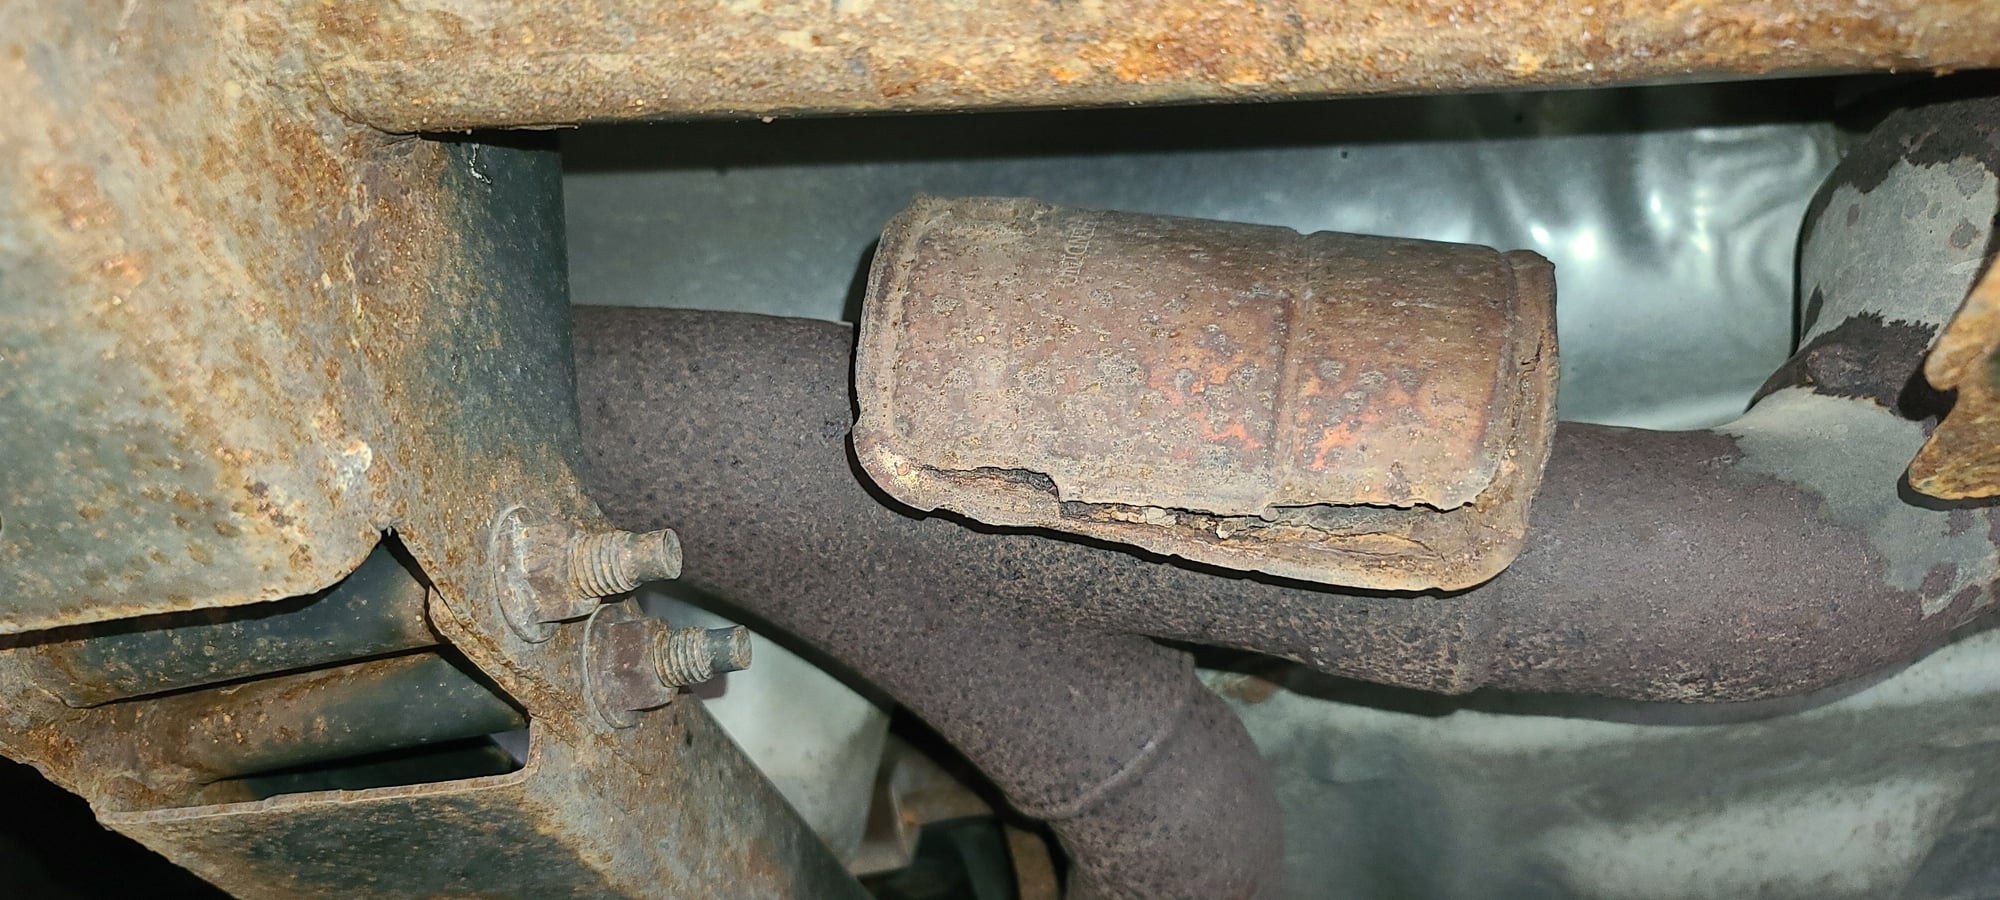 Need help identifying part - Ford F150 Forum - Community of Ford Truck Fans